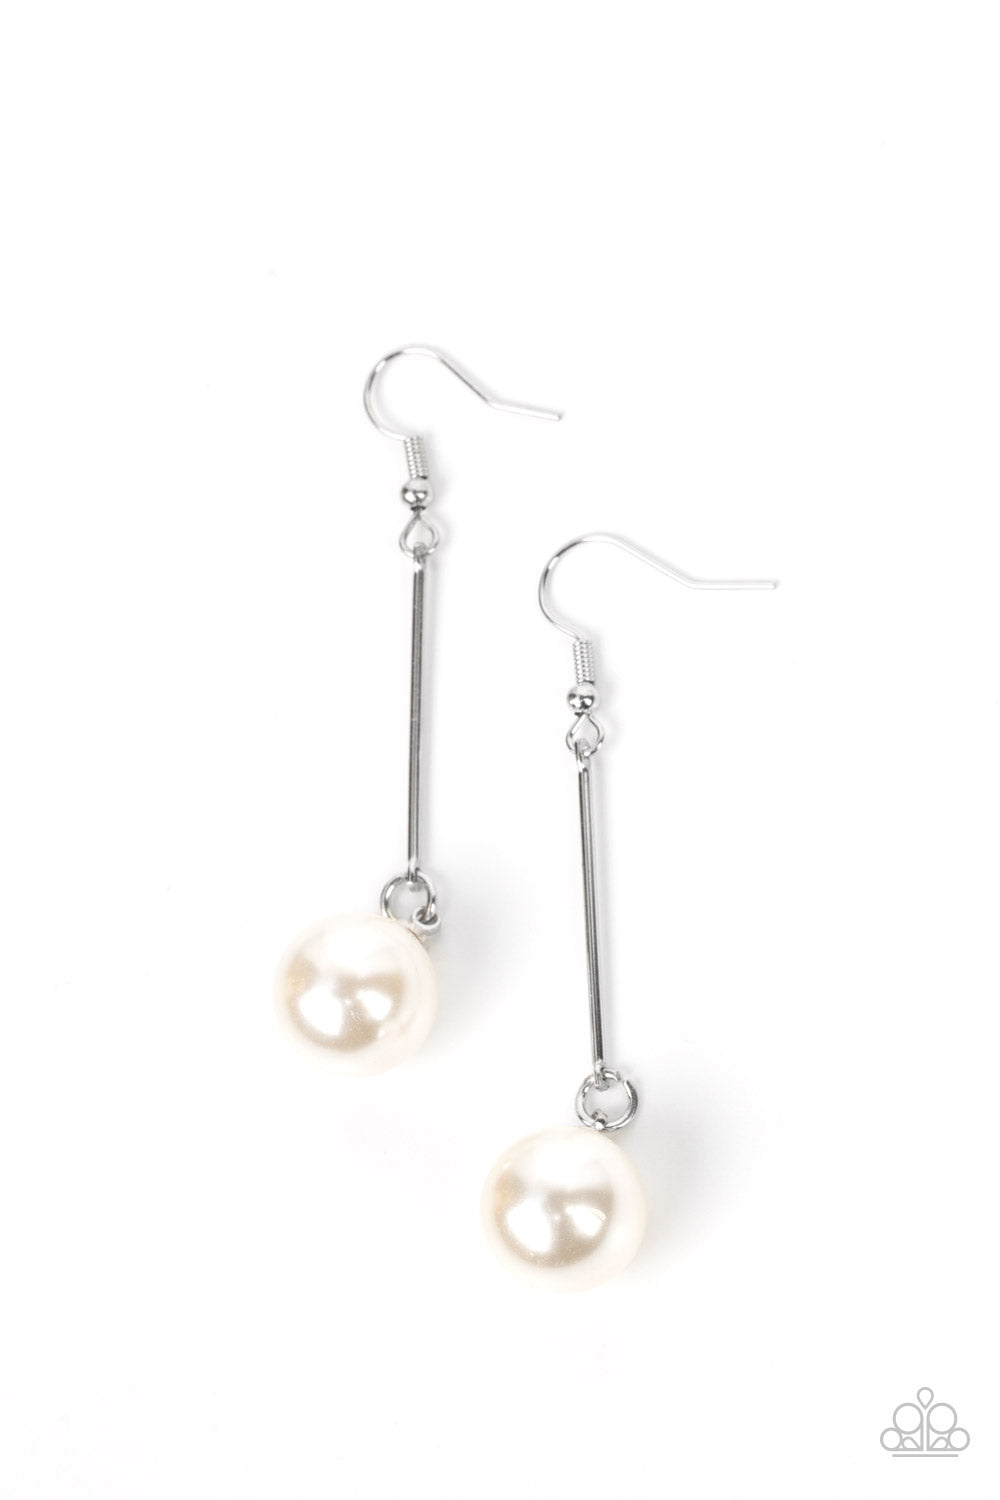 Wreathed In Radiance - Silver Pearl Earrings Paparazzi